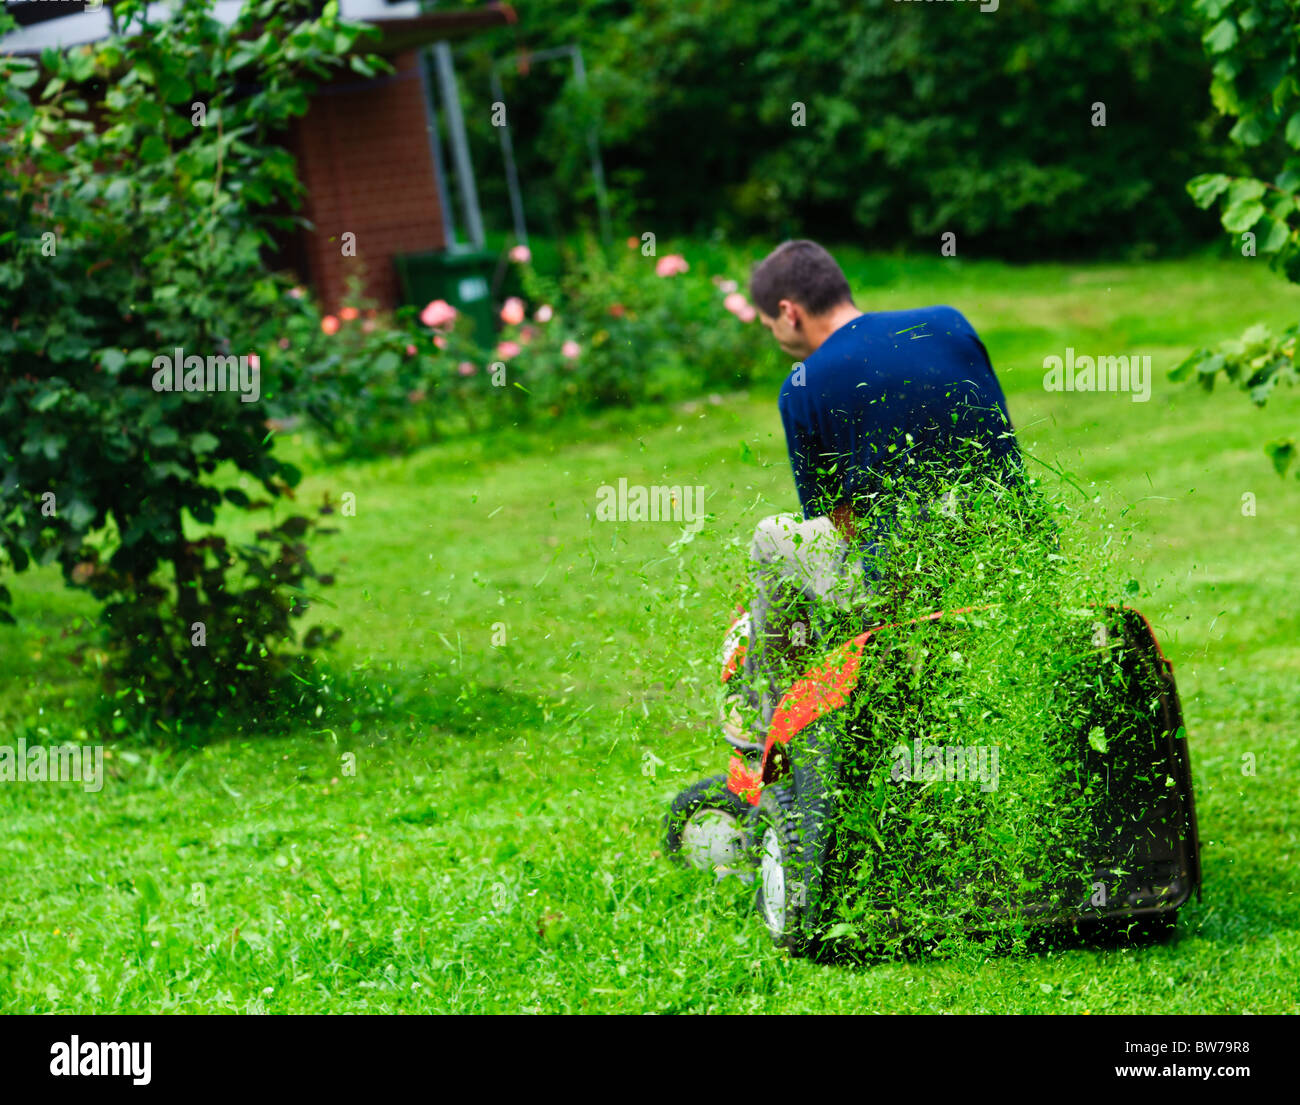 Ride-on lawn mower cutting grass. Focus on grasses in the air. Stock Photo